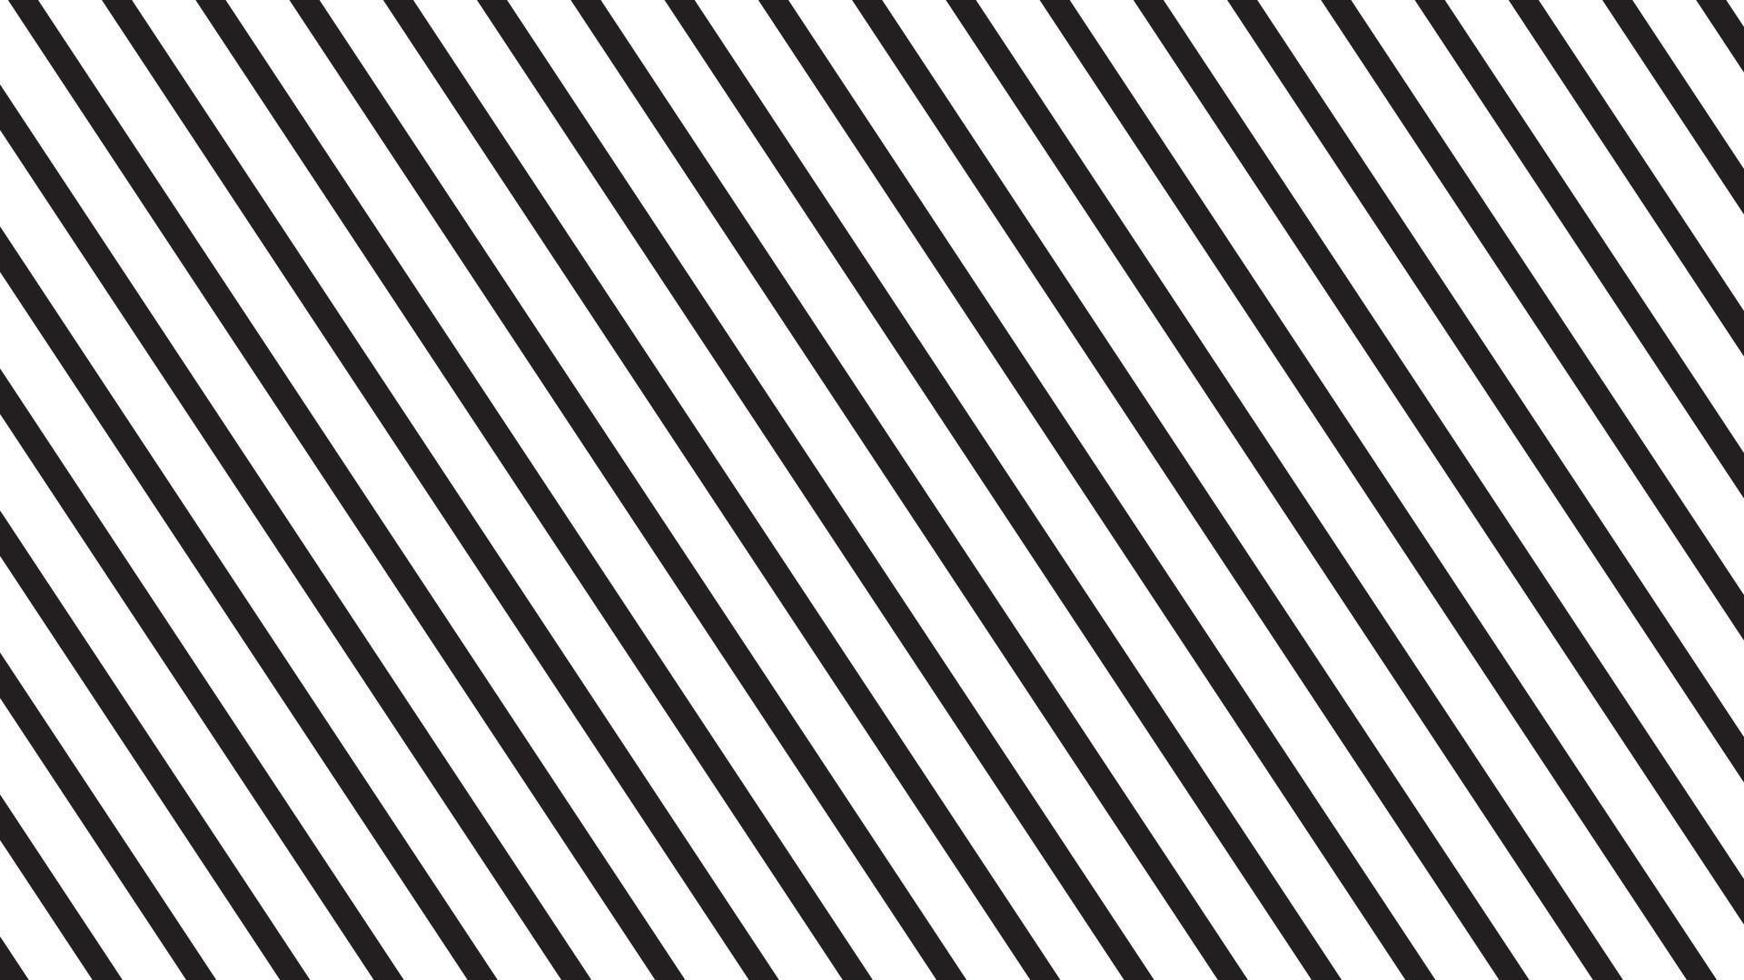 the black pattern of lines. Diagonal lines monochrome striped vector